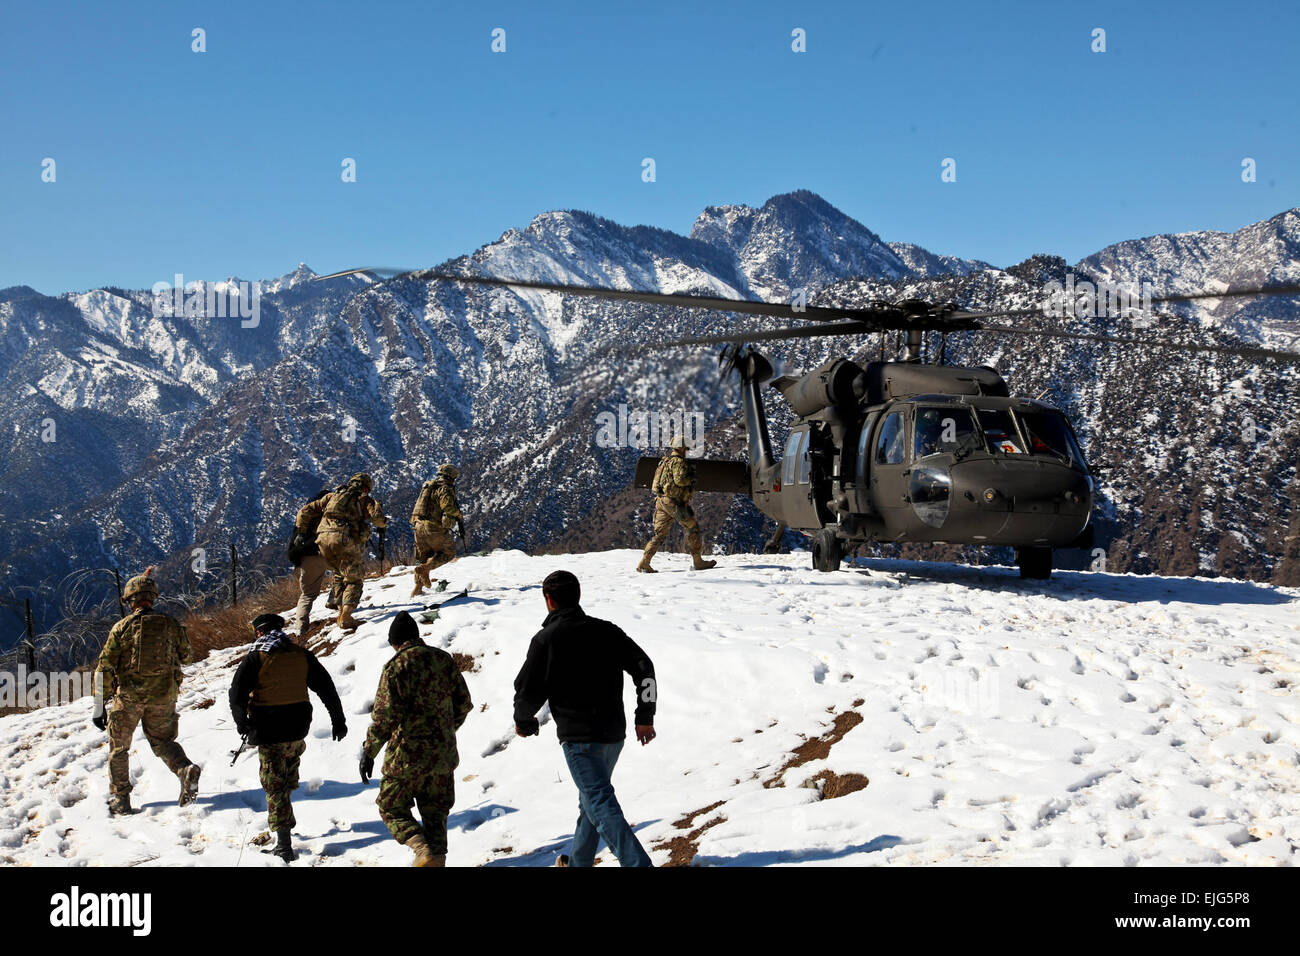 U.S. Soldiers of Headquarters and Headquarters Company, 2nd Battalion, 27th Infantry Regiment, 3rd Brigade Combat Team, 25th Infantry Division, and Afghan National Army Soldiers, prepare to board a U.S. Army UH-60 Black Hawk helicopter, at Observation Post Mangol, Feb. 8, 2012, in the Nari district, Kunar province, Afghanistan. Stock Photo